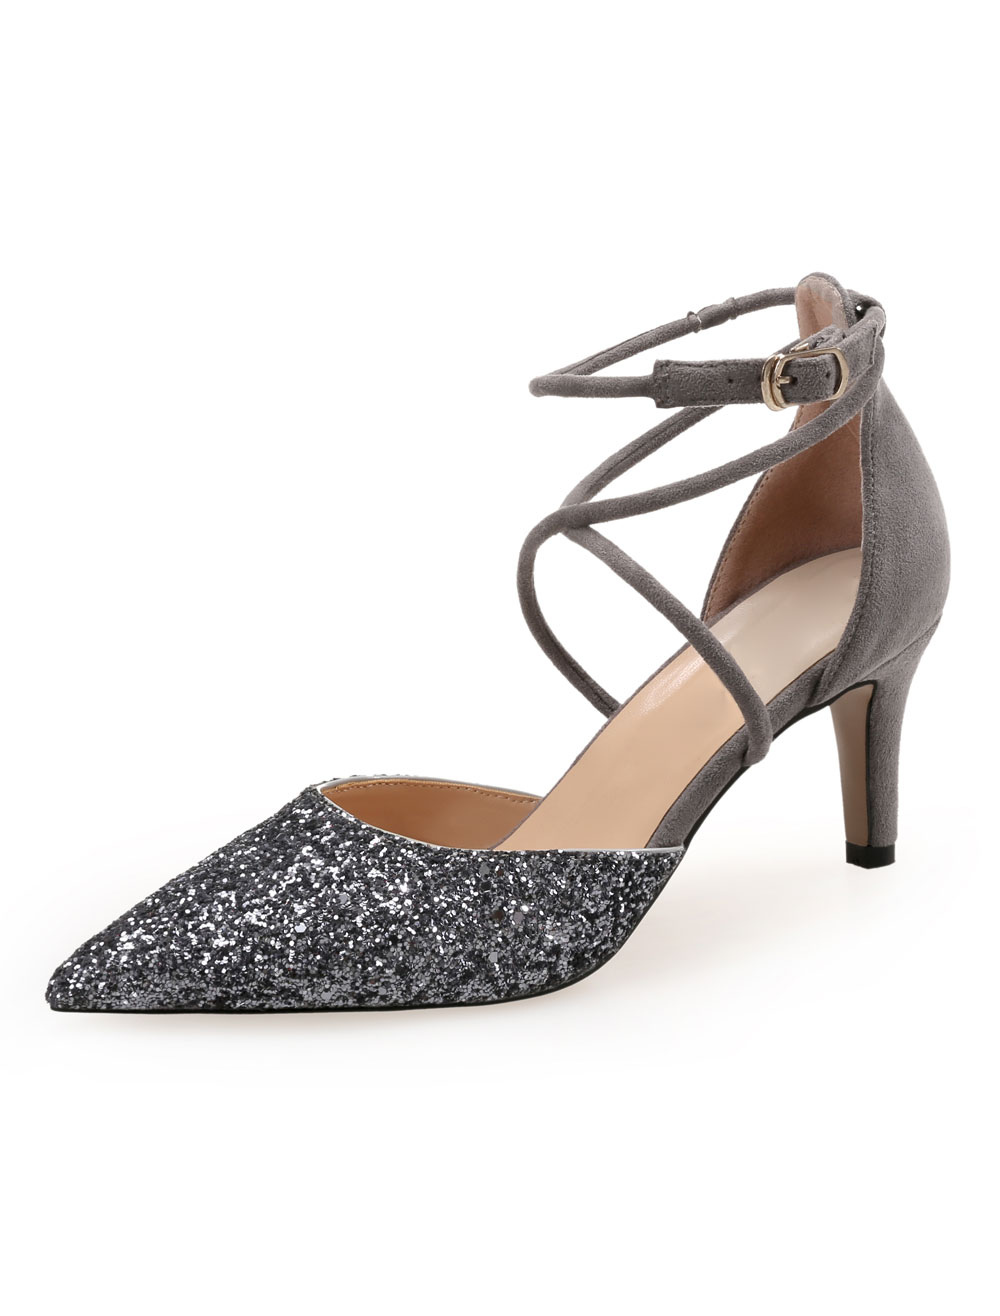 Grey High Heels Glitter Pointed Toe Criss Cross Ankle Strap Evening ...